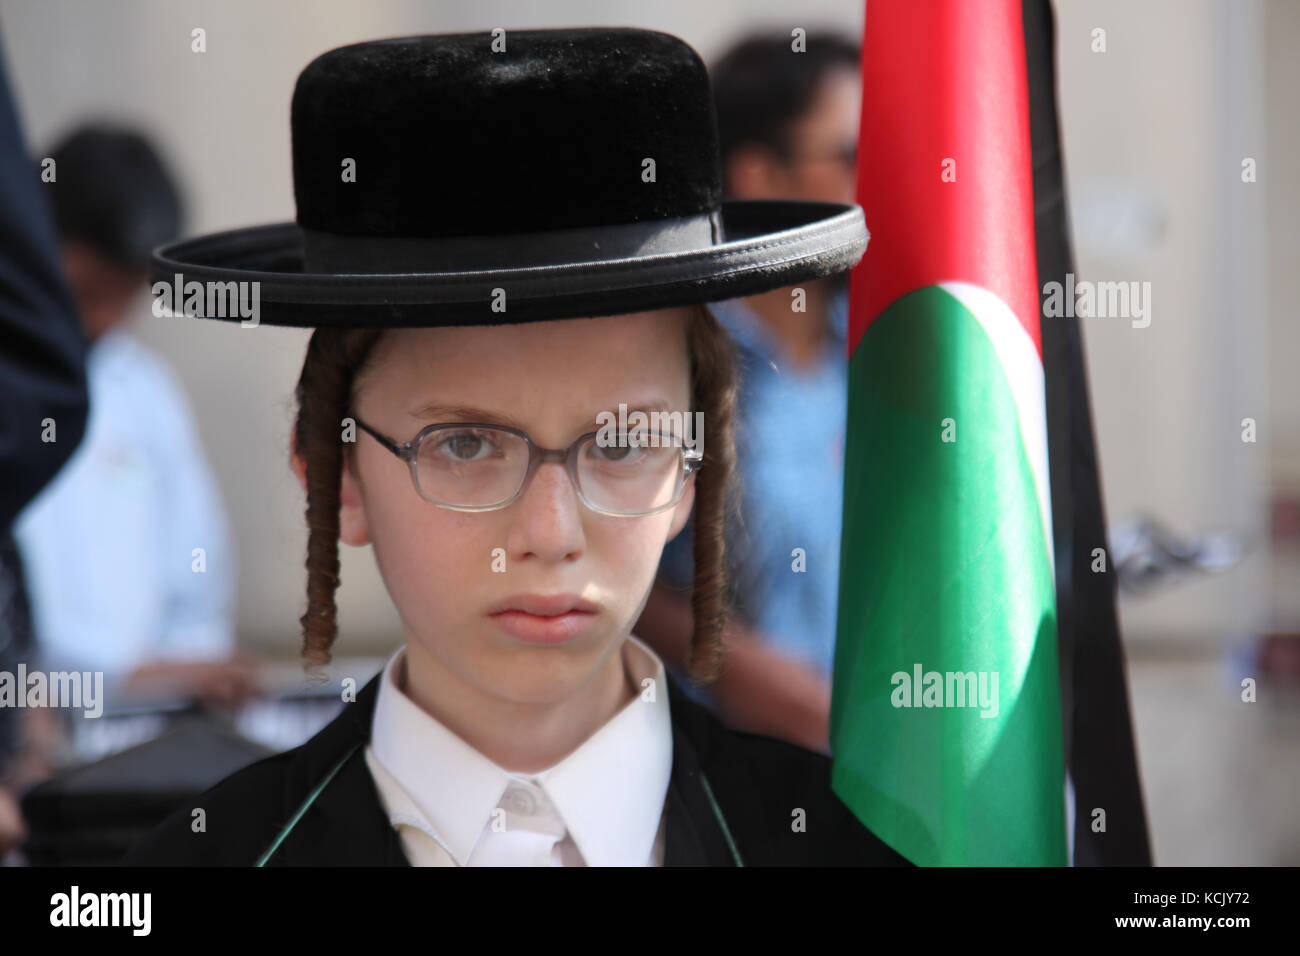 August 2, 2013 - The Neturei Karta is a religious group of Haredi Jews perceiving themselves as the 'true Jews''. They oppose Zionism and the state of Israel as they believe that Jews are forbidden to have their own state prior to the coming of the Jewish messiah Credit: Mara Jini/ImagesLive/ZUMA Wire/Alamy Live News Stock Photo